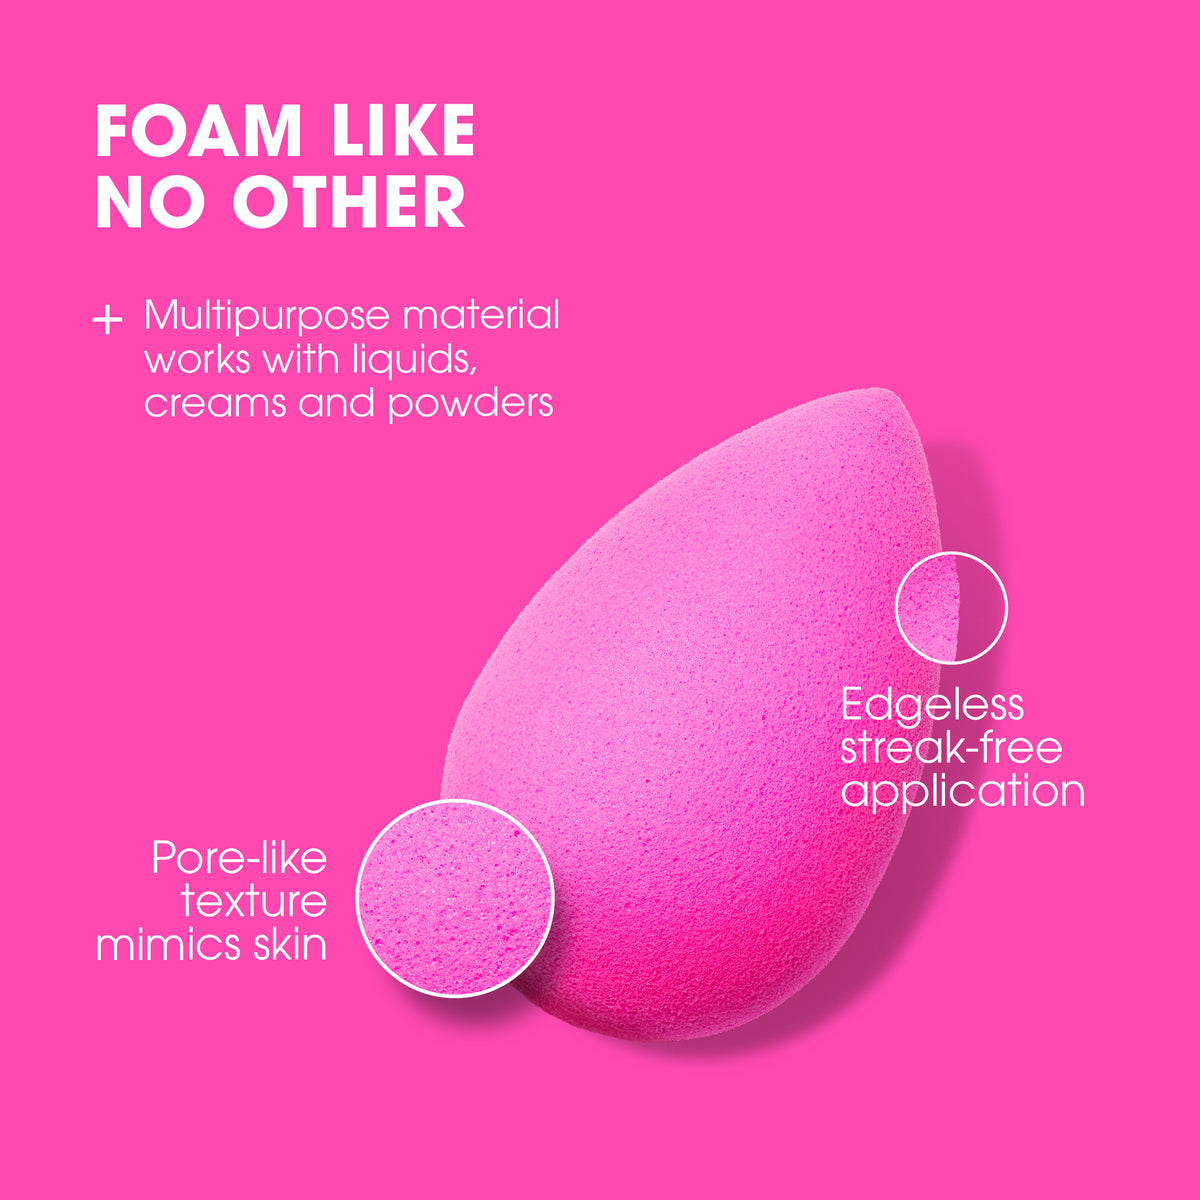 Beautyblender® Original Beauty Queen Limited-Edition with Crystal Nest.